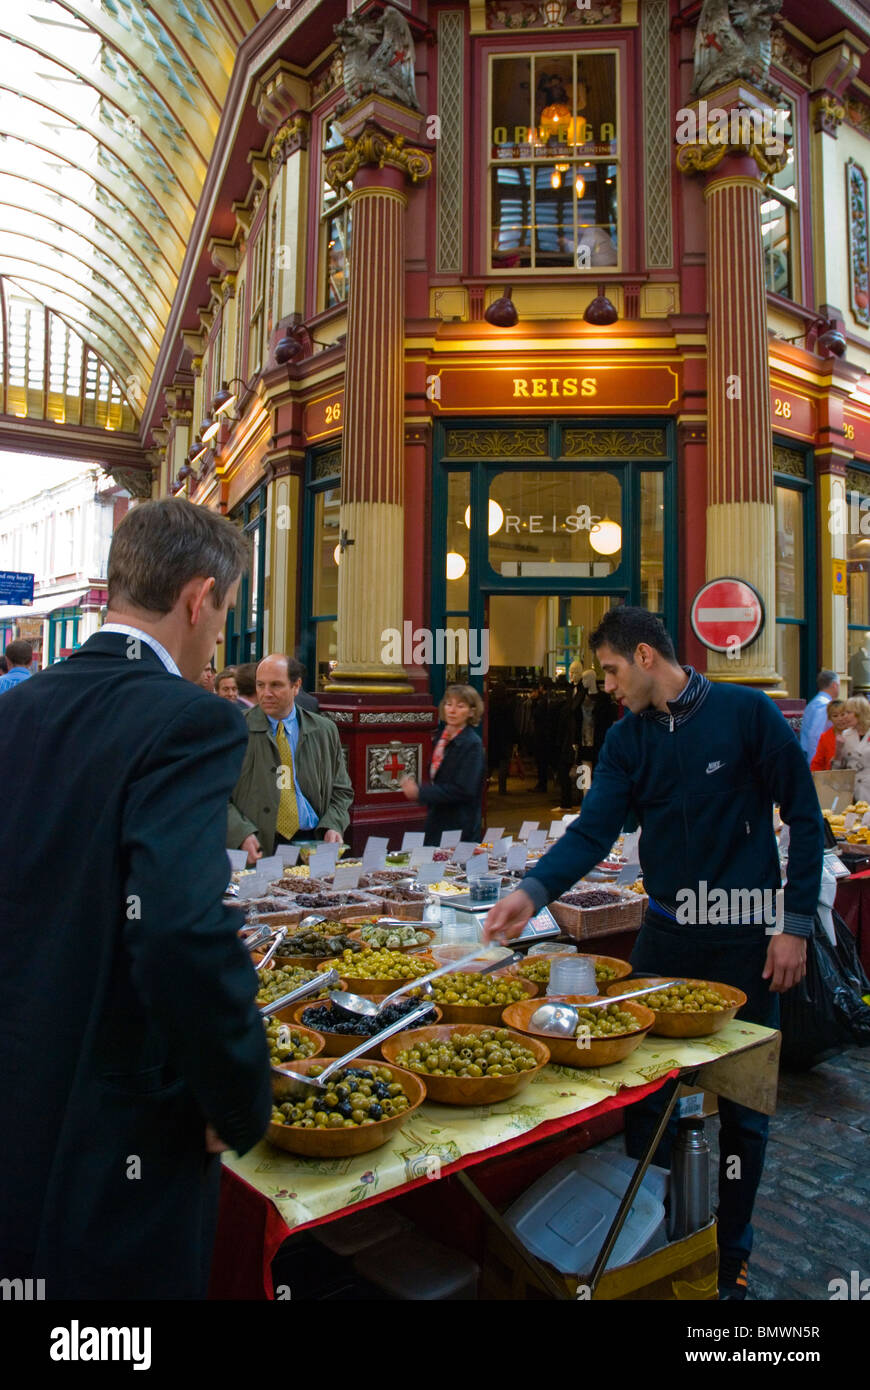 Stall selling olives and other delicacies at Leadenhall market City of London England UK Europe Stock Photo